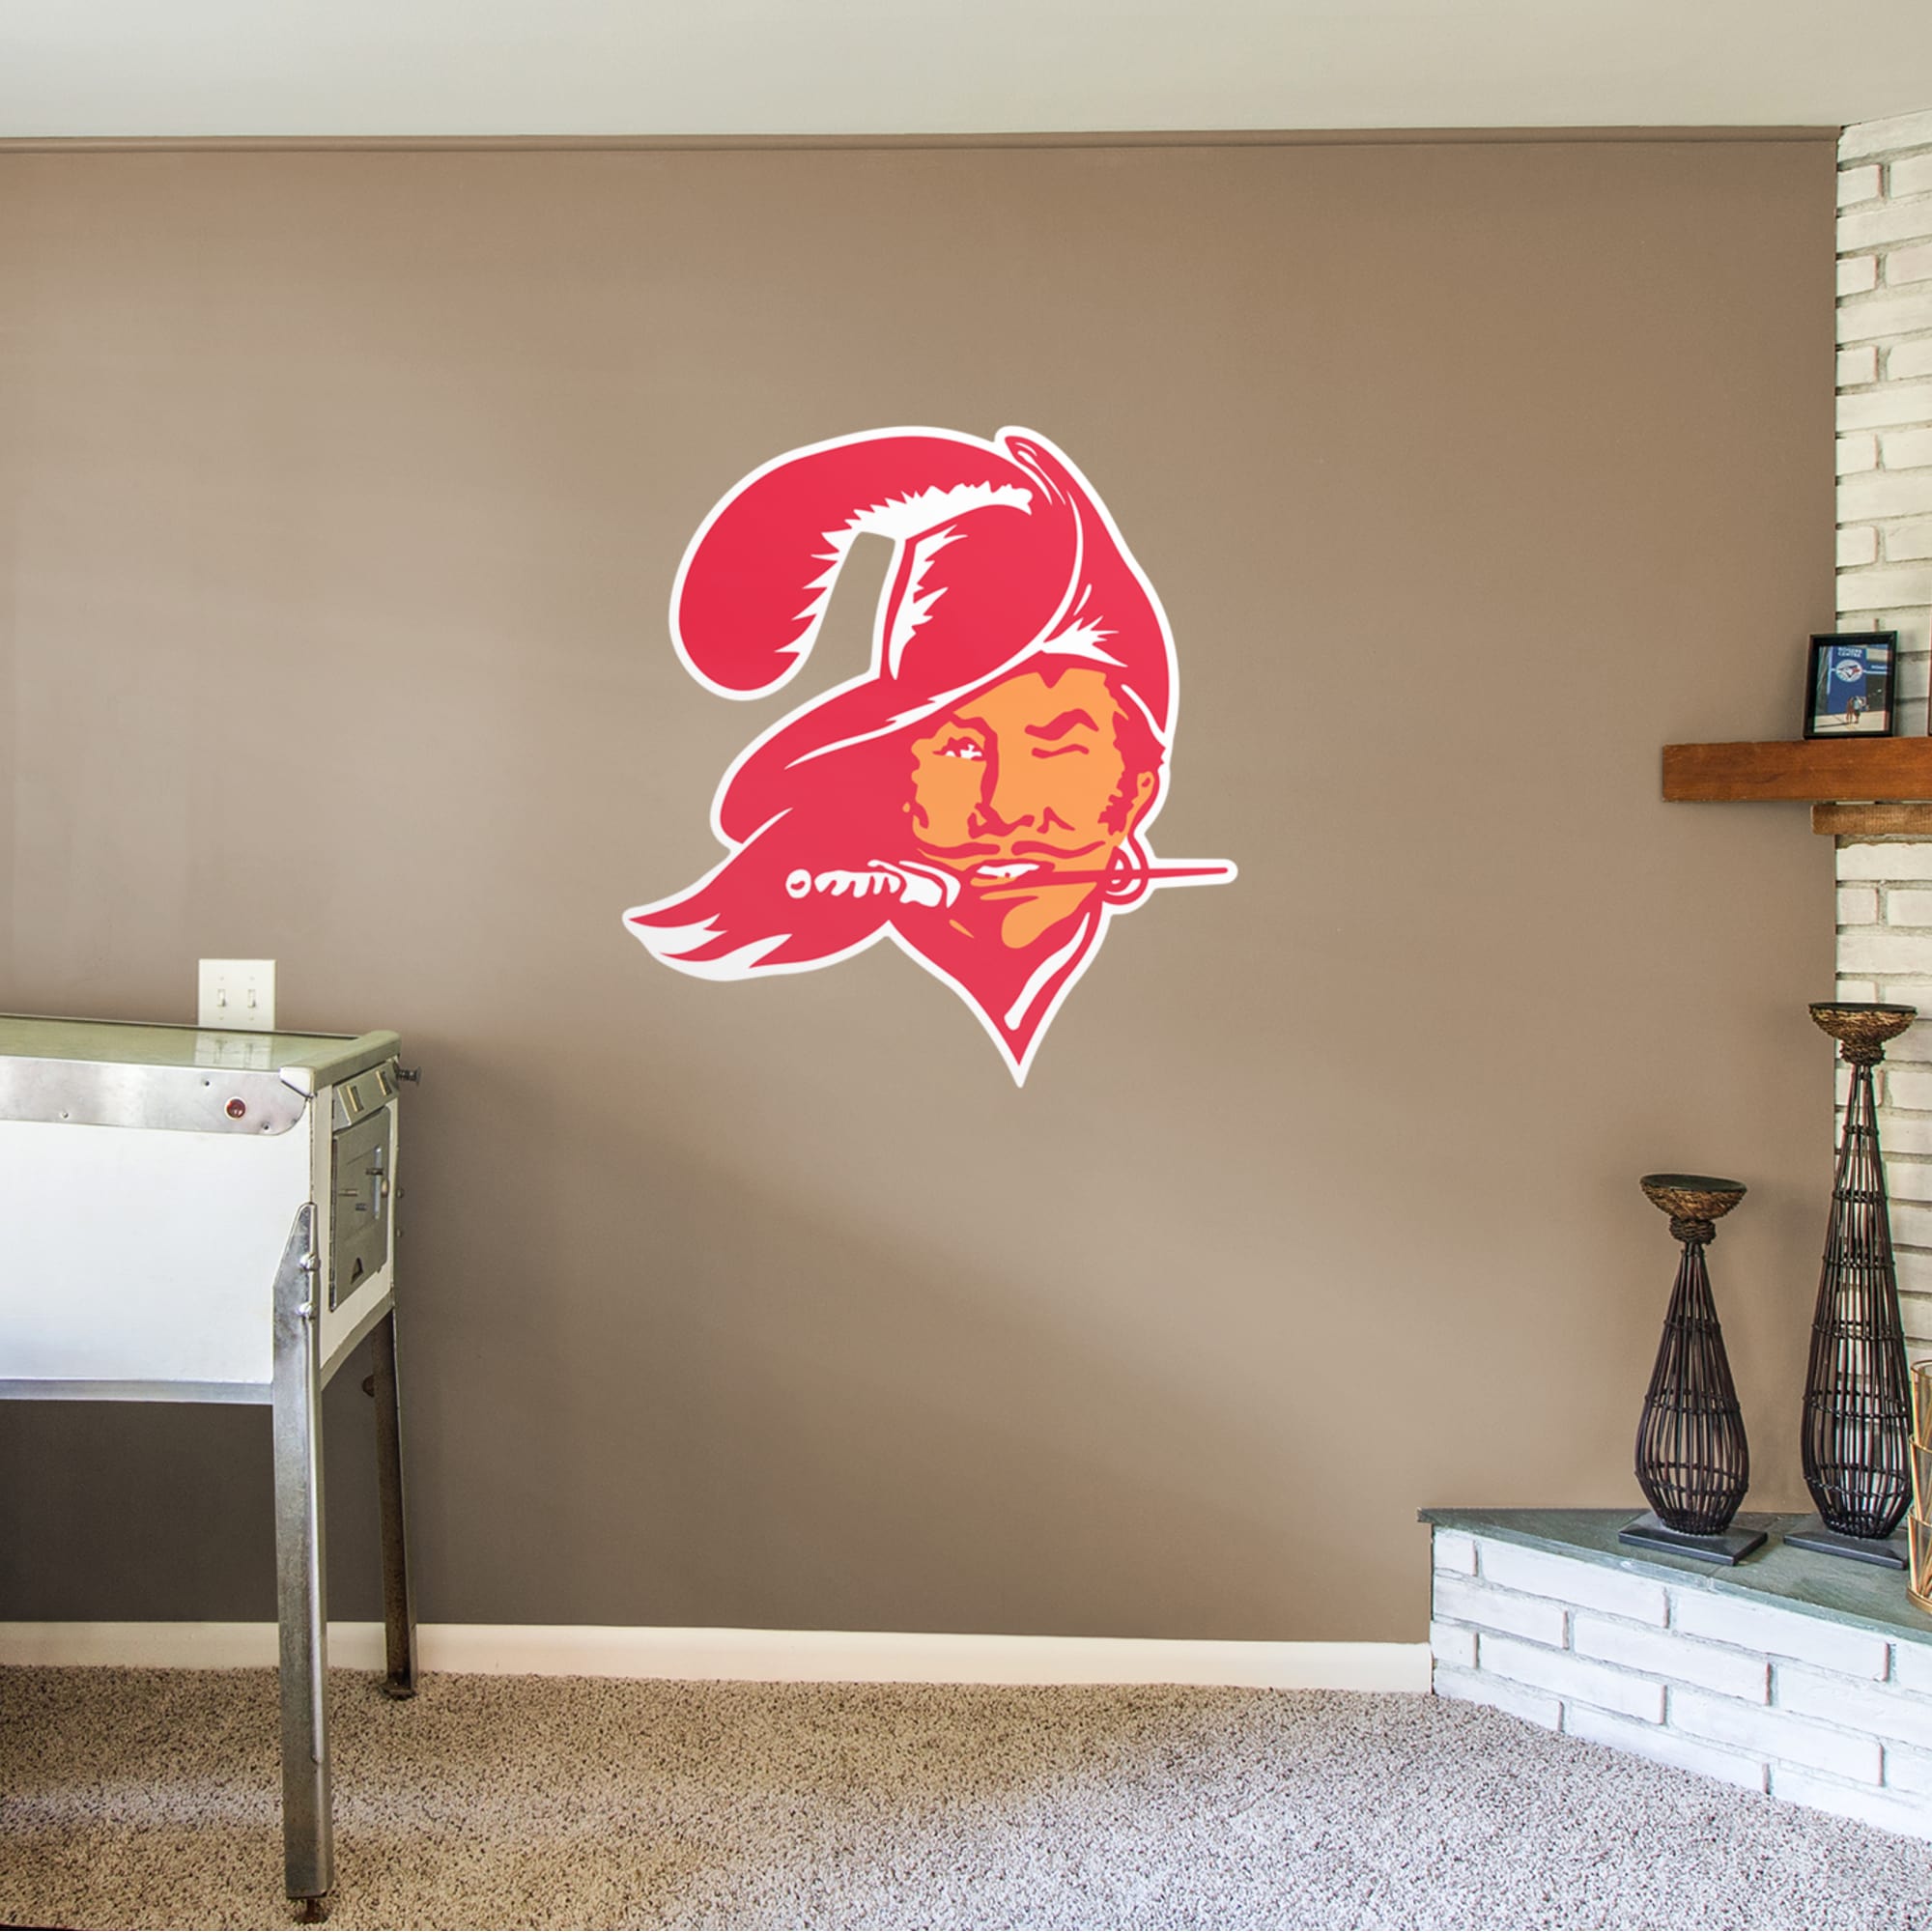 Tampa Bay Buccaneers: Classic Logo - Officially Licensed NFL Removable Wall Decal 37.0"W x 40.0"H by Fathead | Vinyl